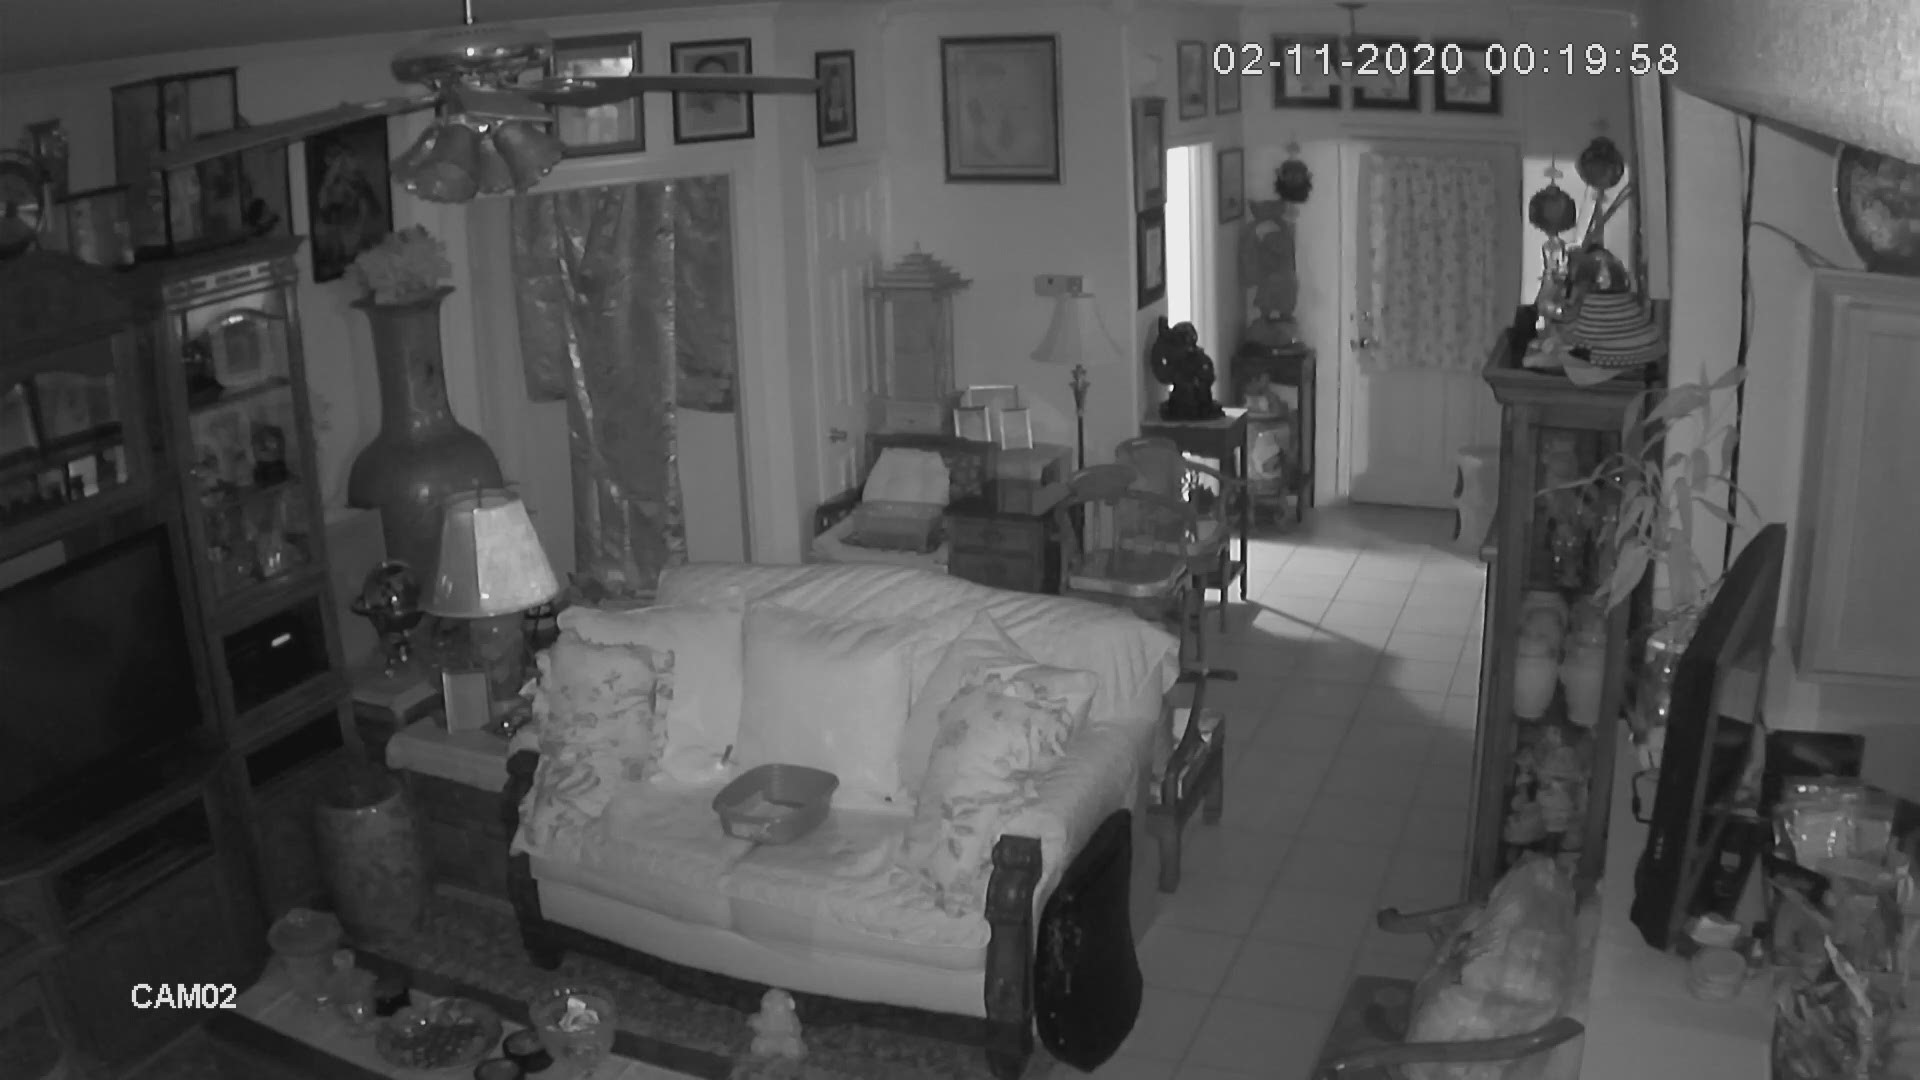 The Aransas Pass Police Department has released home security camera footage of a home invasion robbery that happened just after midnight Tuesday.